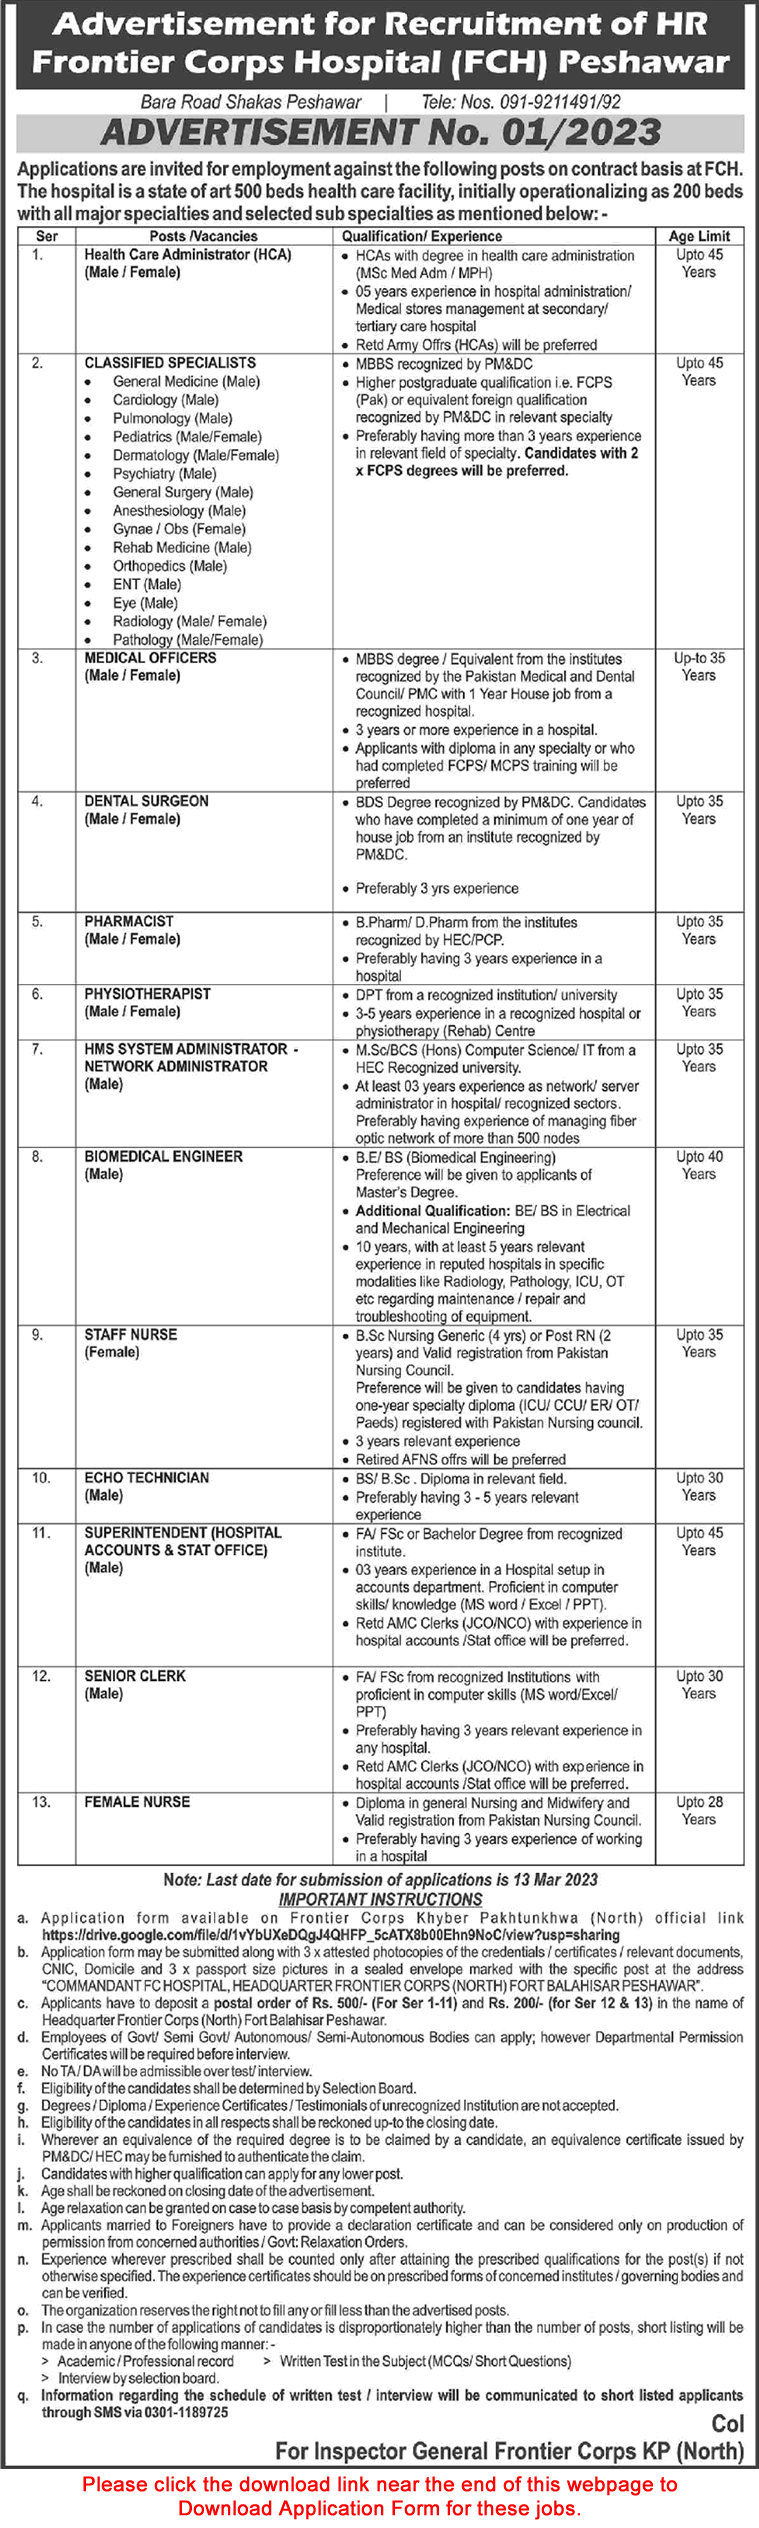 Frontier Corps Hospital Peshawar Jobs 2023 February Application Form Medical Officers, Nurses & Others Latest